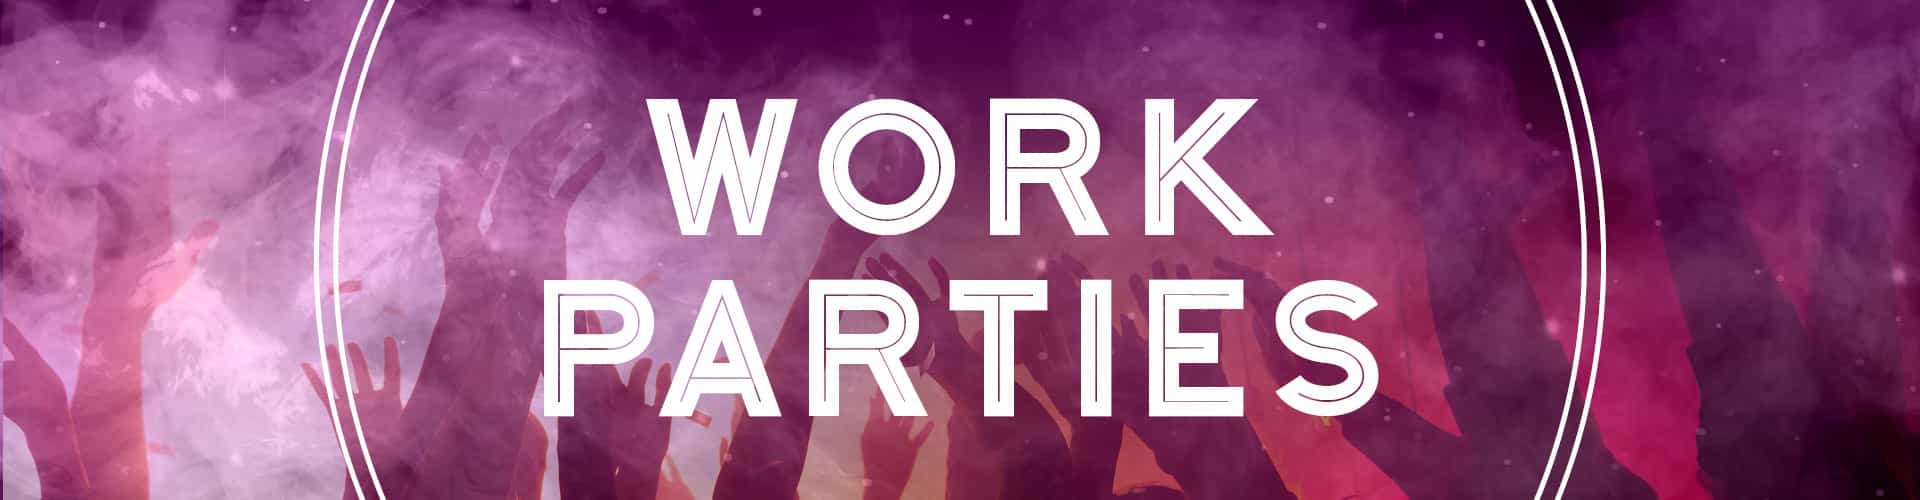 Work Parties at Boutique Basingstoke